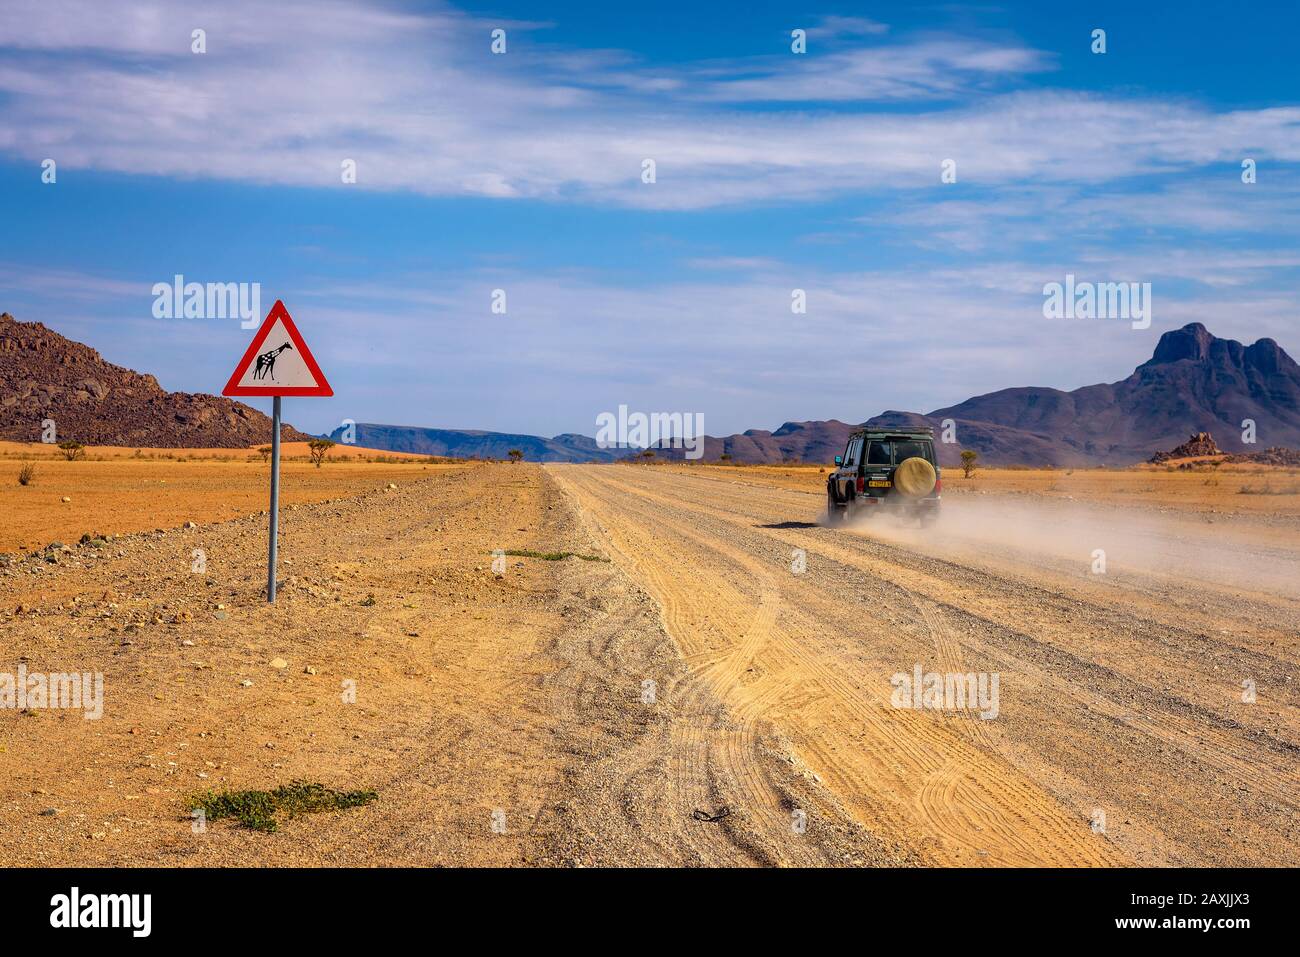 Car passing a Giraffes warning road sign in the desert of Namibia Stock Photo